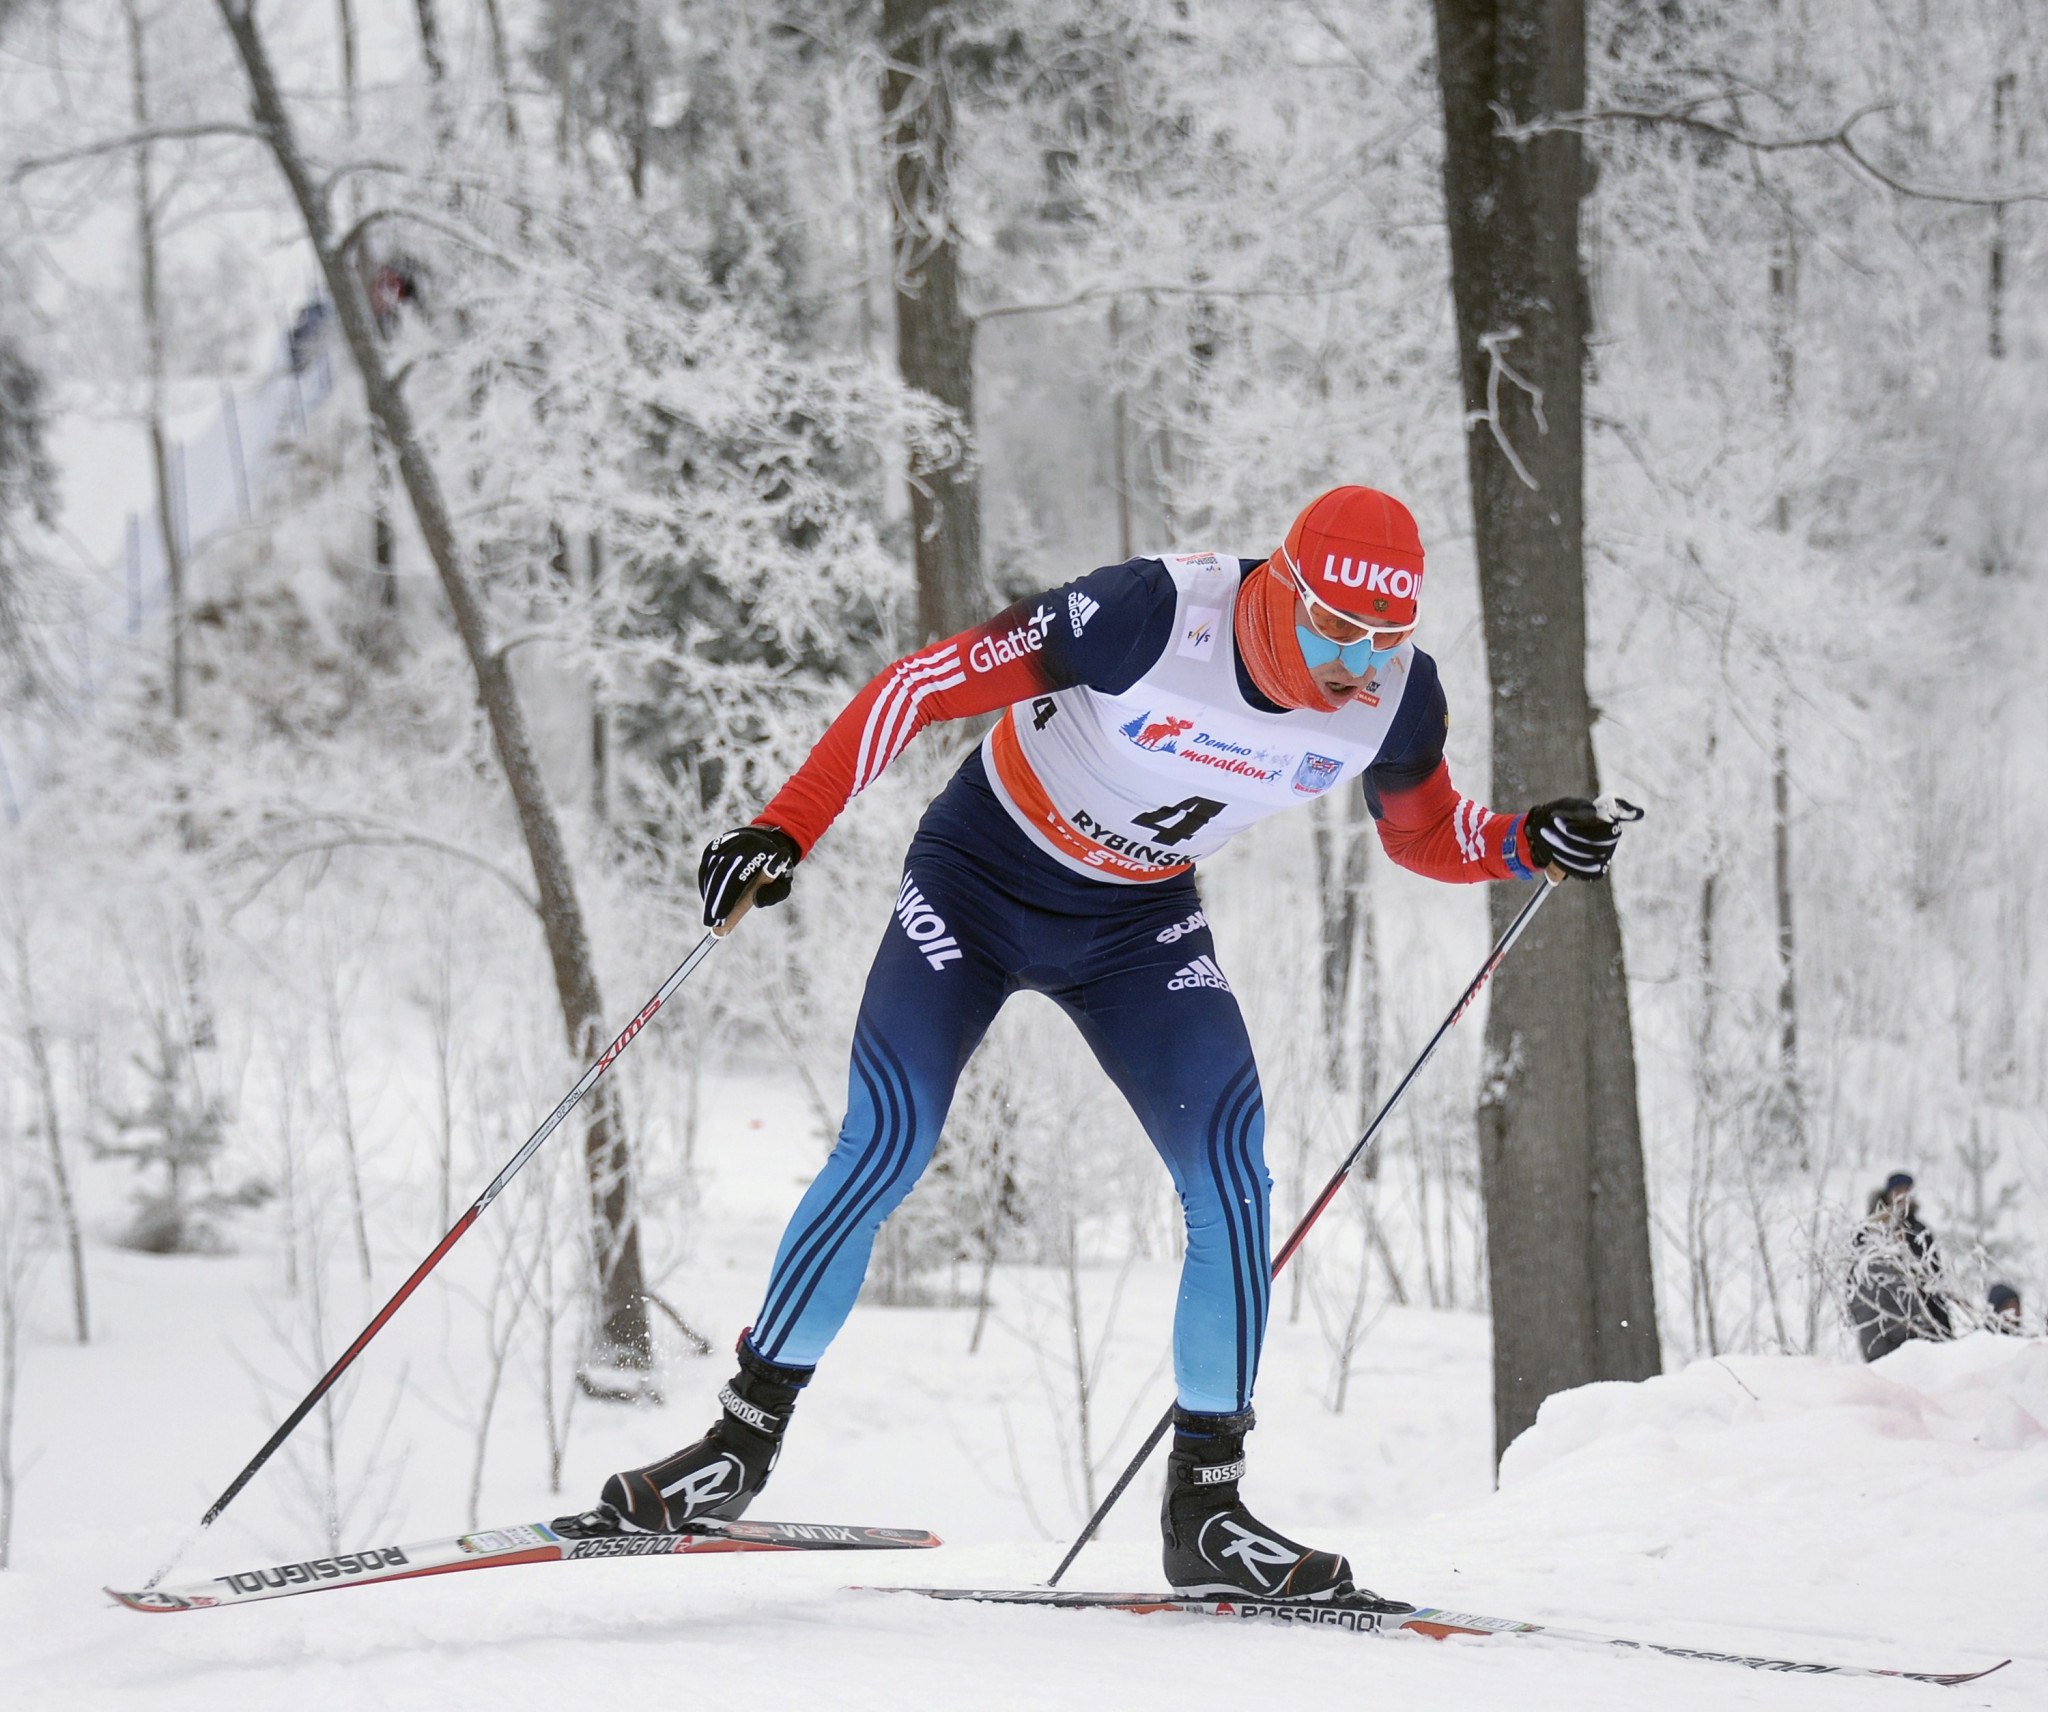 An update on the status of cases involving six Russian cross-country athletes identified in the McLaren Report is set to be provided by the International Ski Federation later this week ©Getty Images